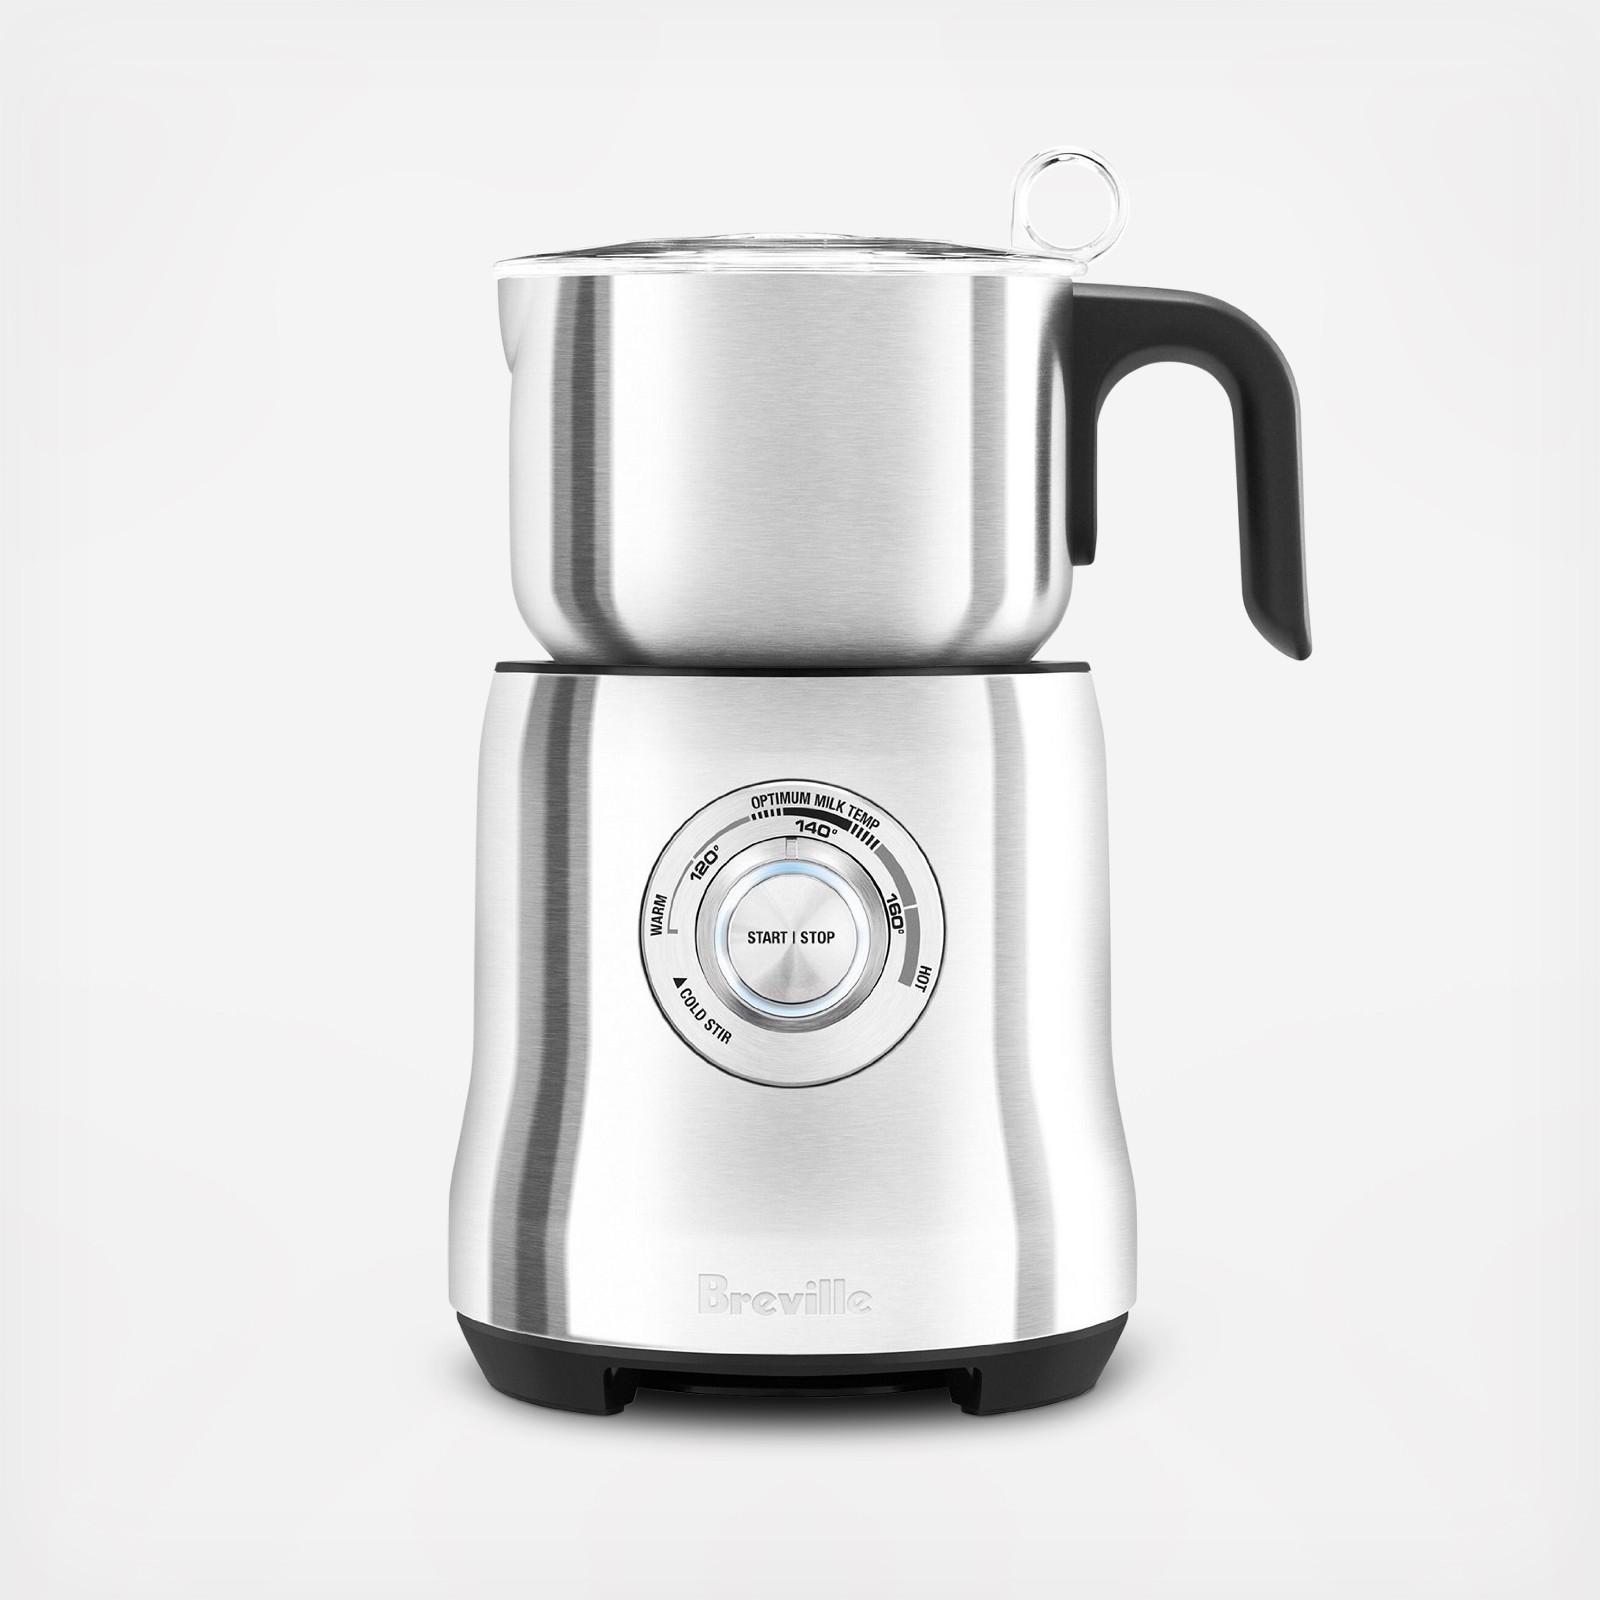 Breville, One-Touch Tea Maker - Zola